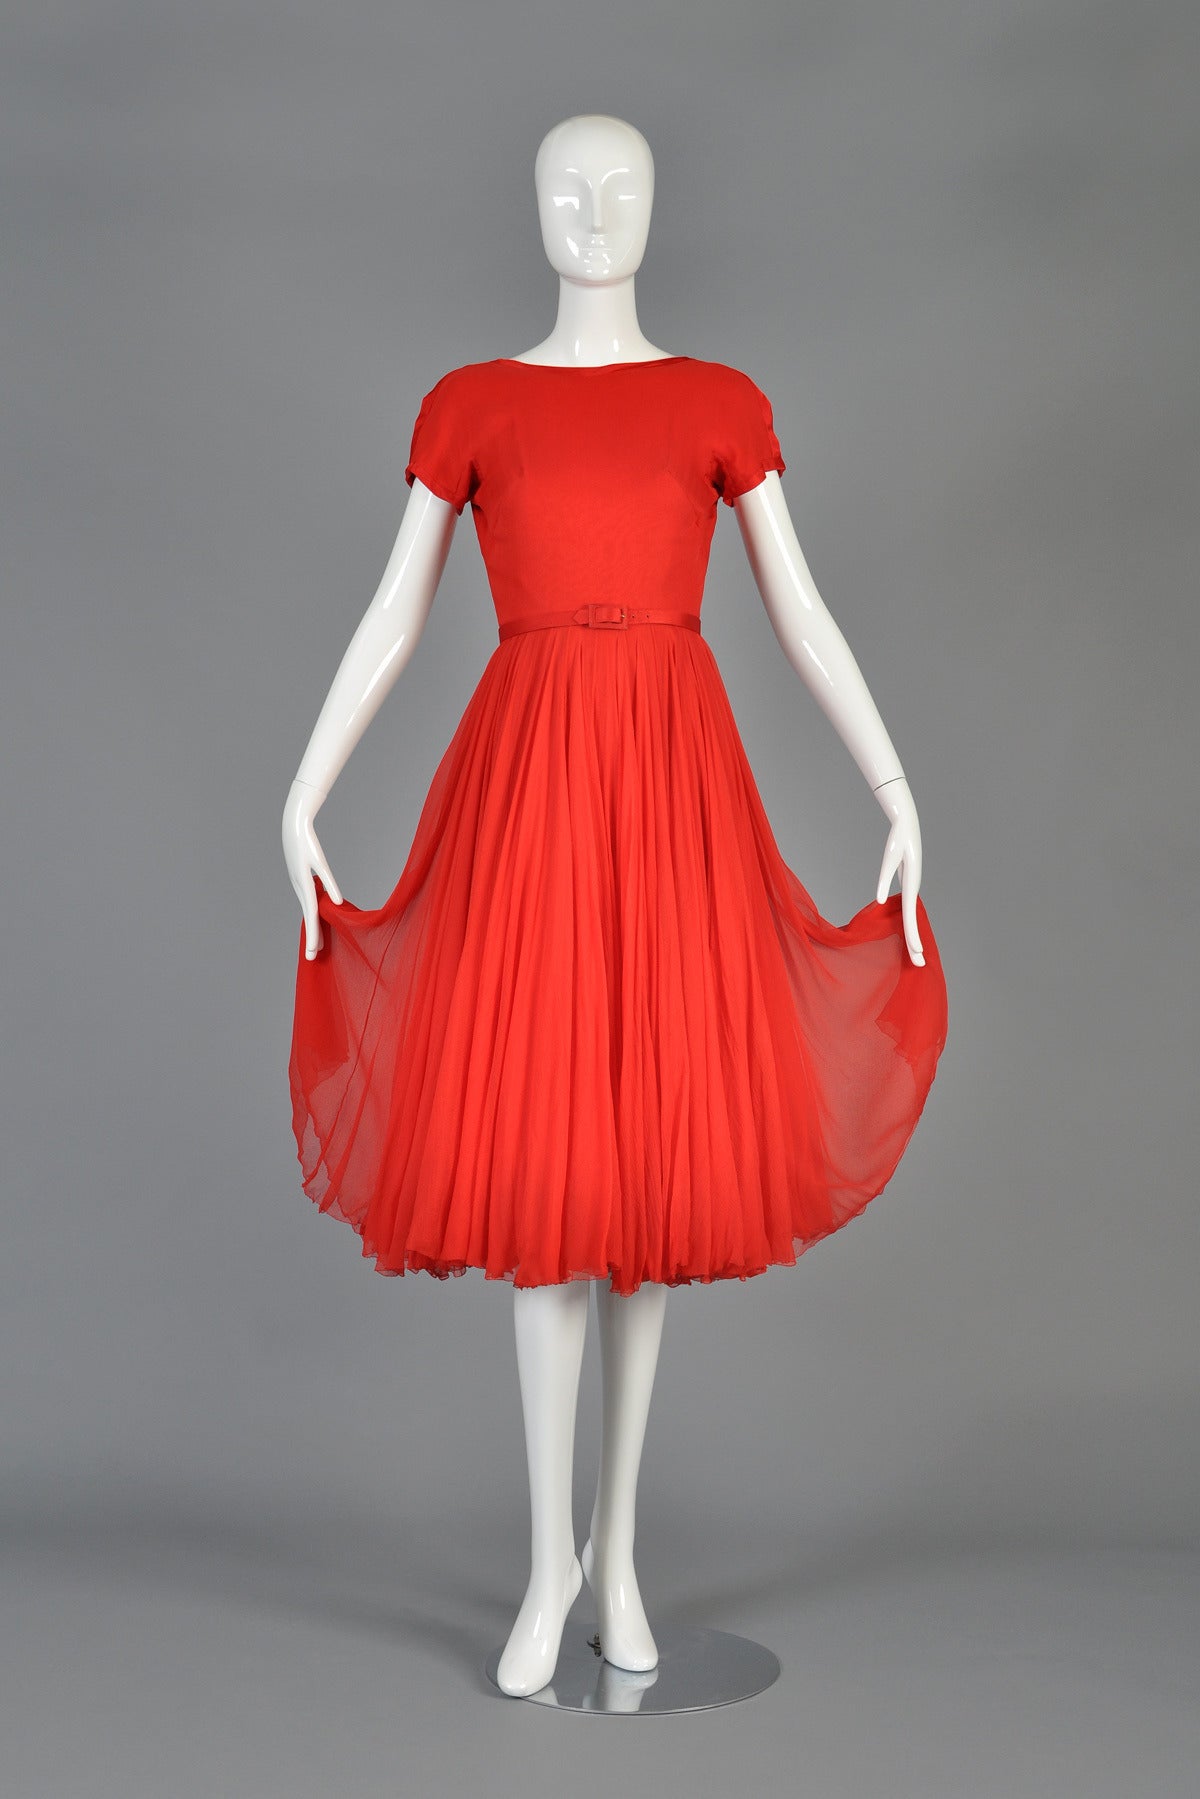 Beautiful circa 1951 party dress by the most superb of American designers, James Galanos. Known for his beautiful, near couture construction, this dress is sure to quench the thirst of even the most devoted collector.

Comprised of layers and